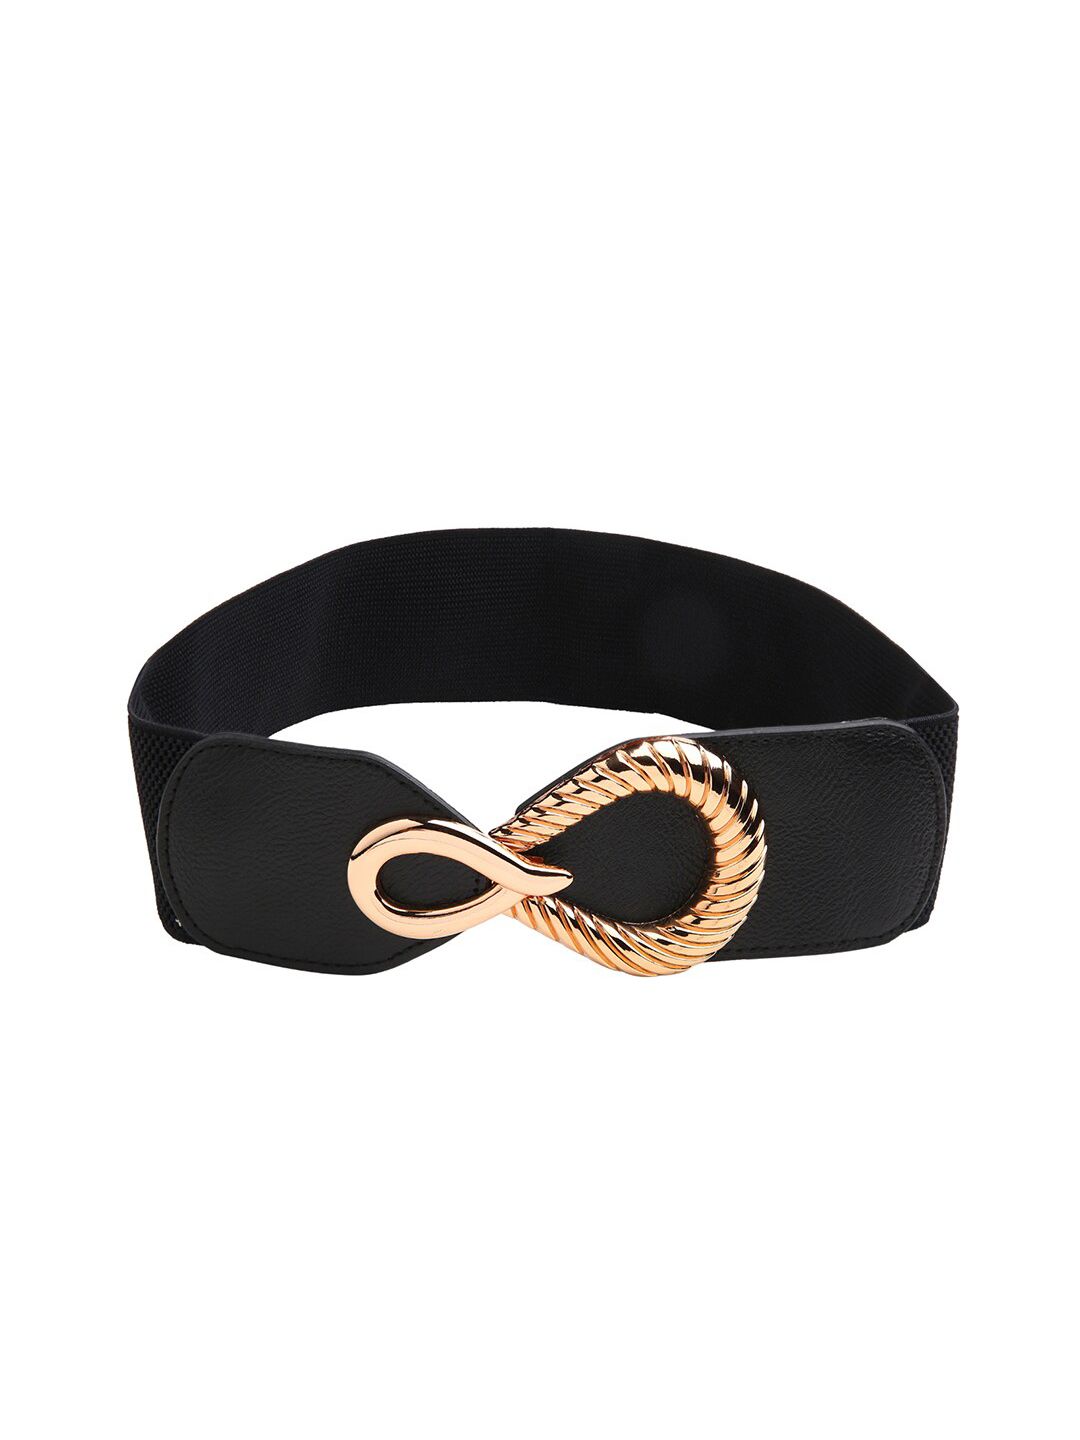 CRUSSET Women Black Textured Belt with Embellished Closure Price in India